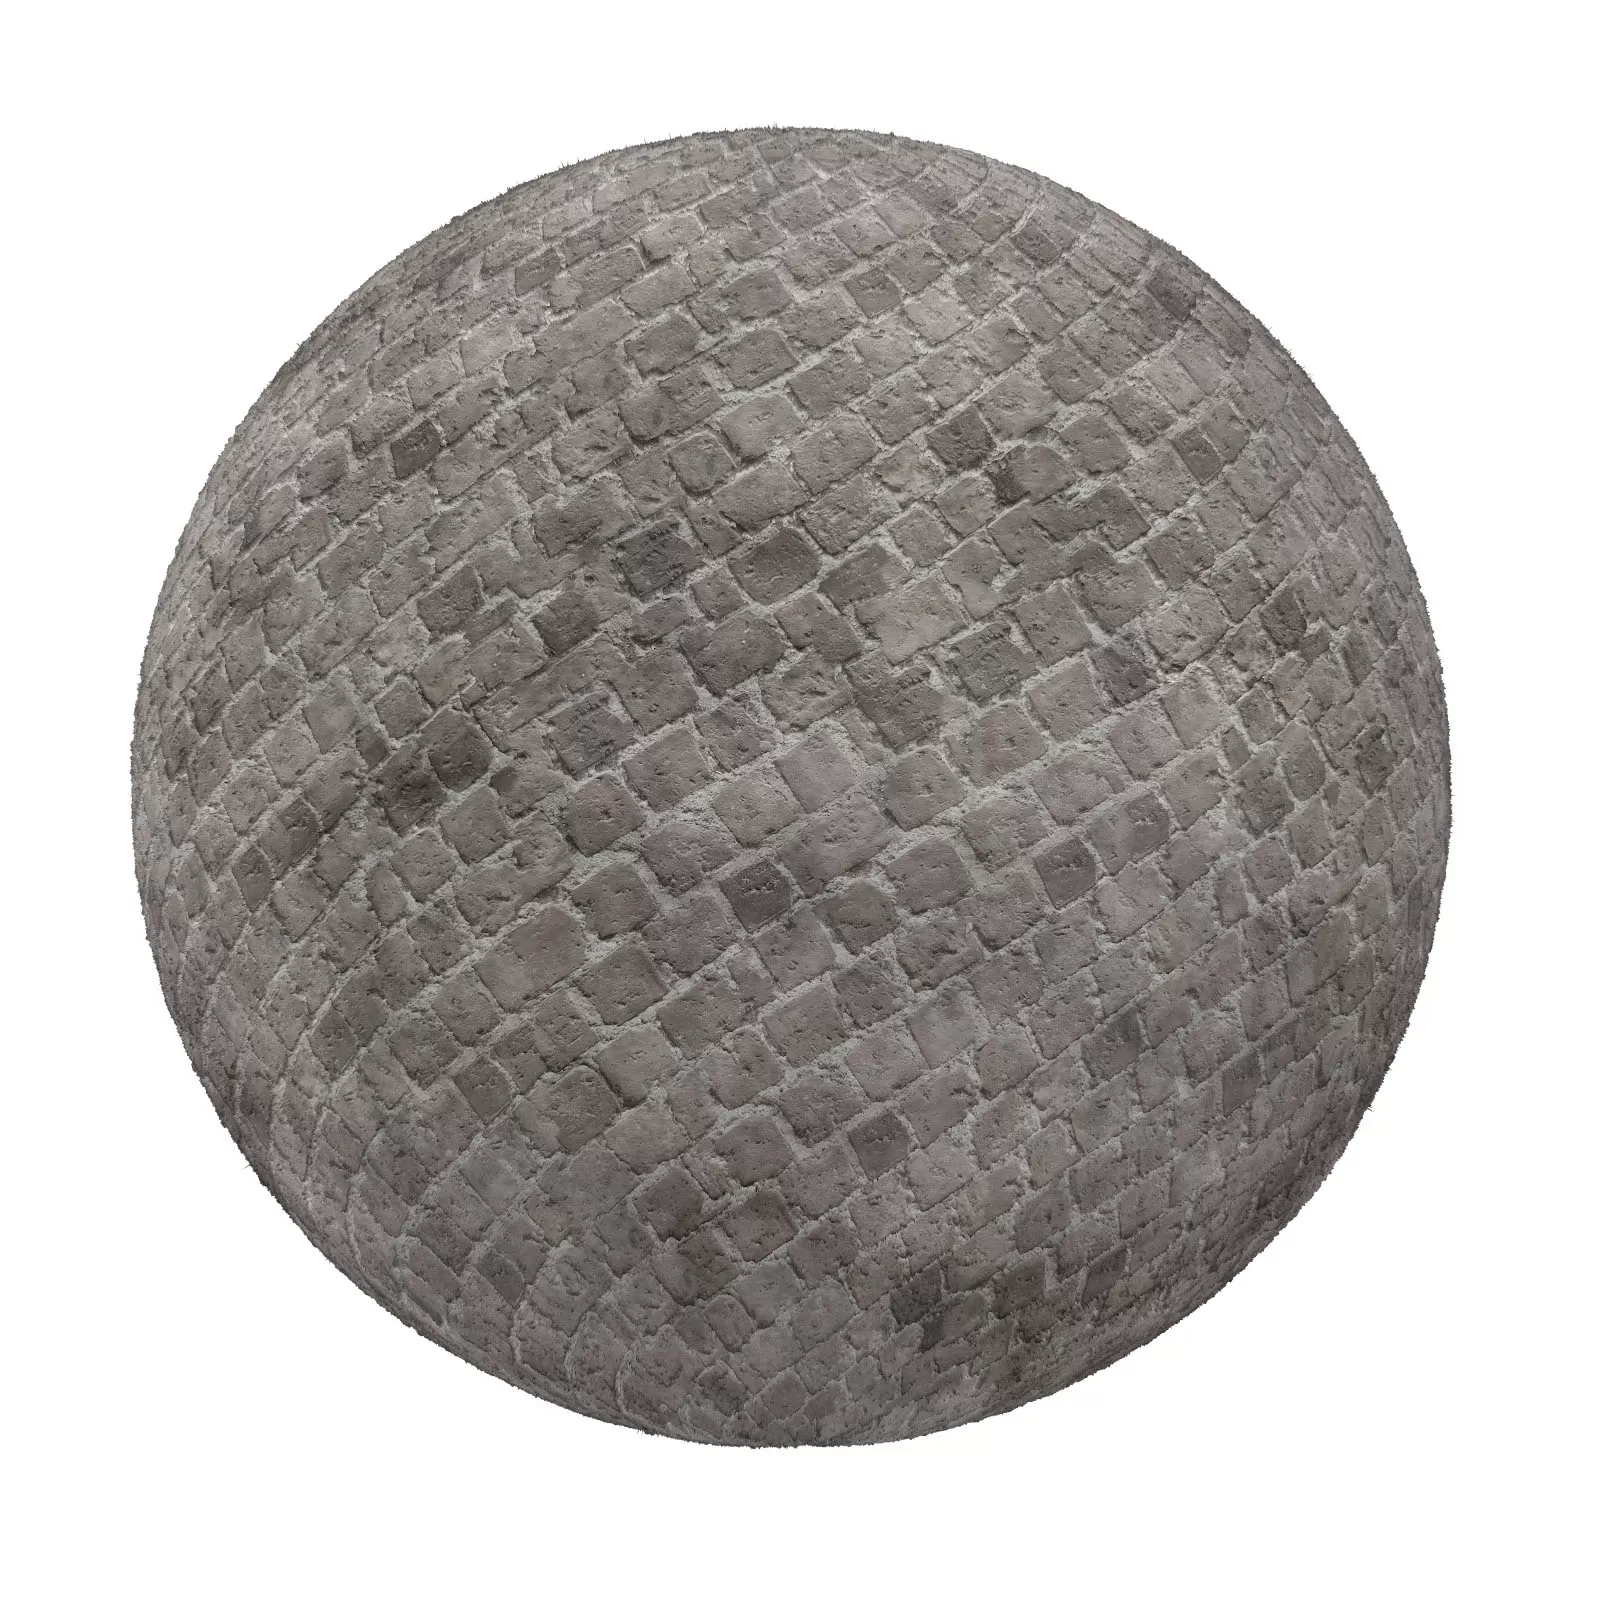 PBR CGAXIS TEXTURES – PAVEMENTS – Stone Pavement 22